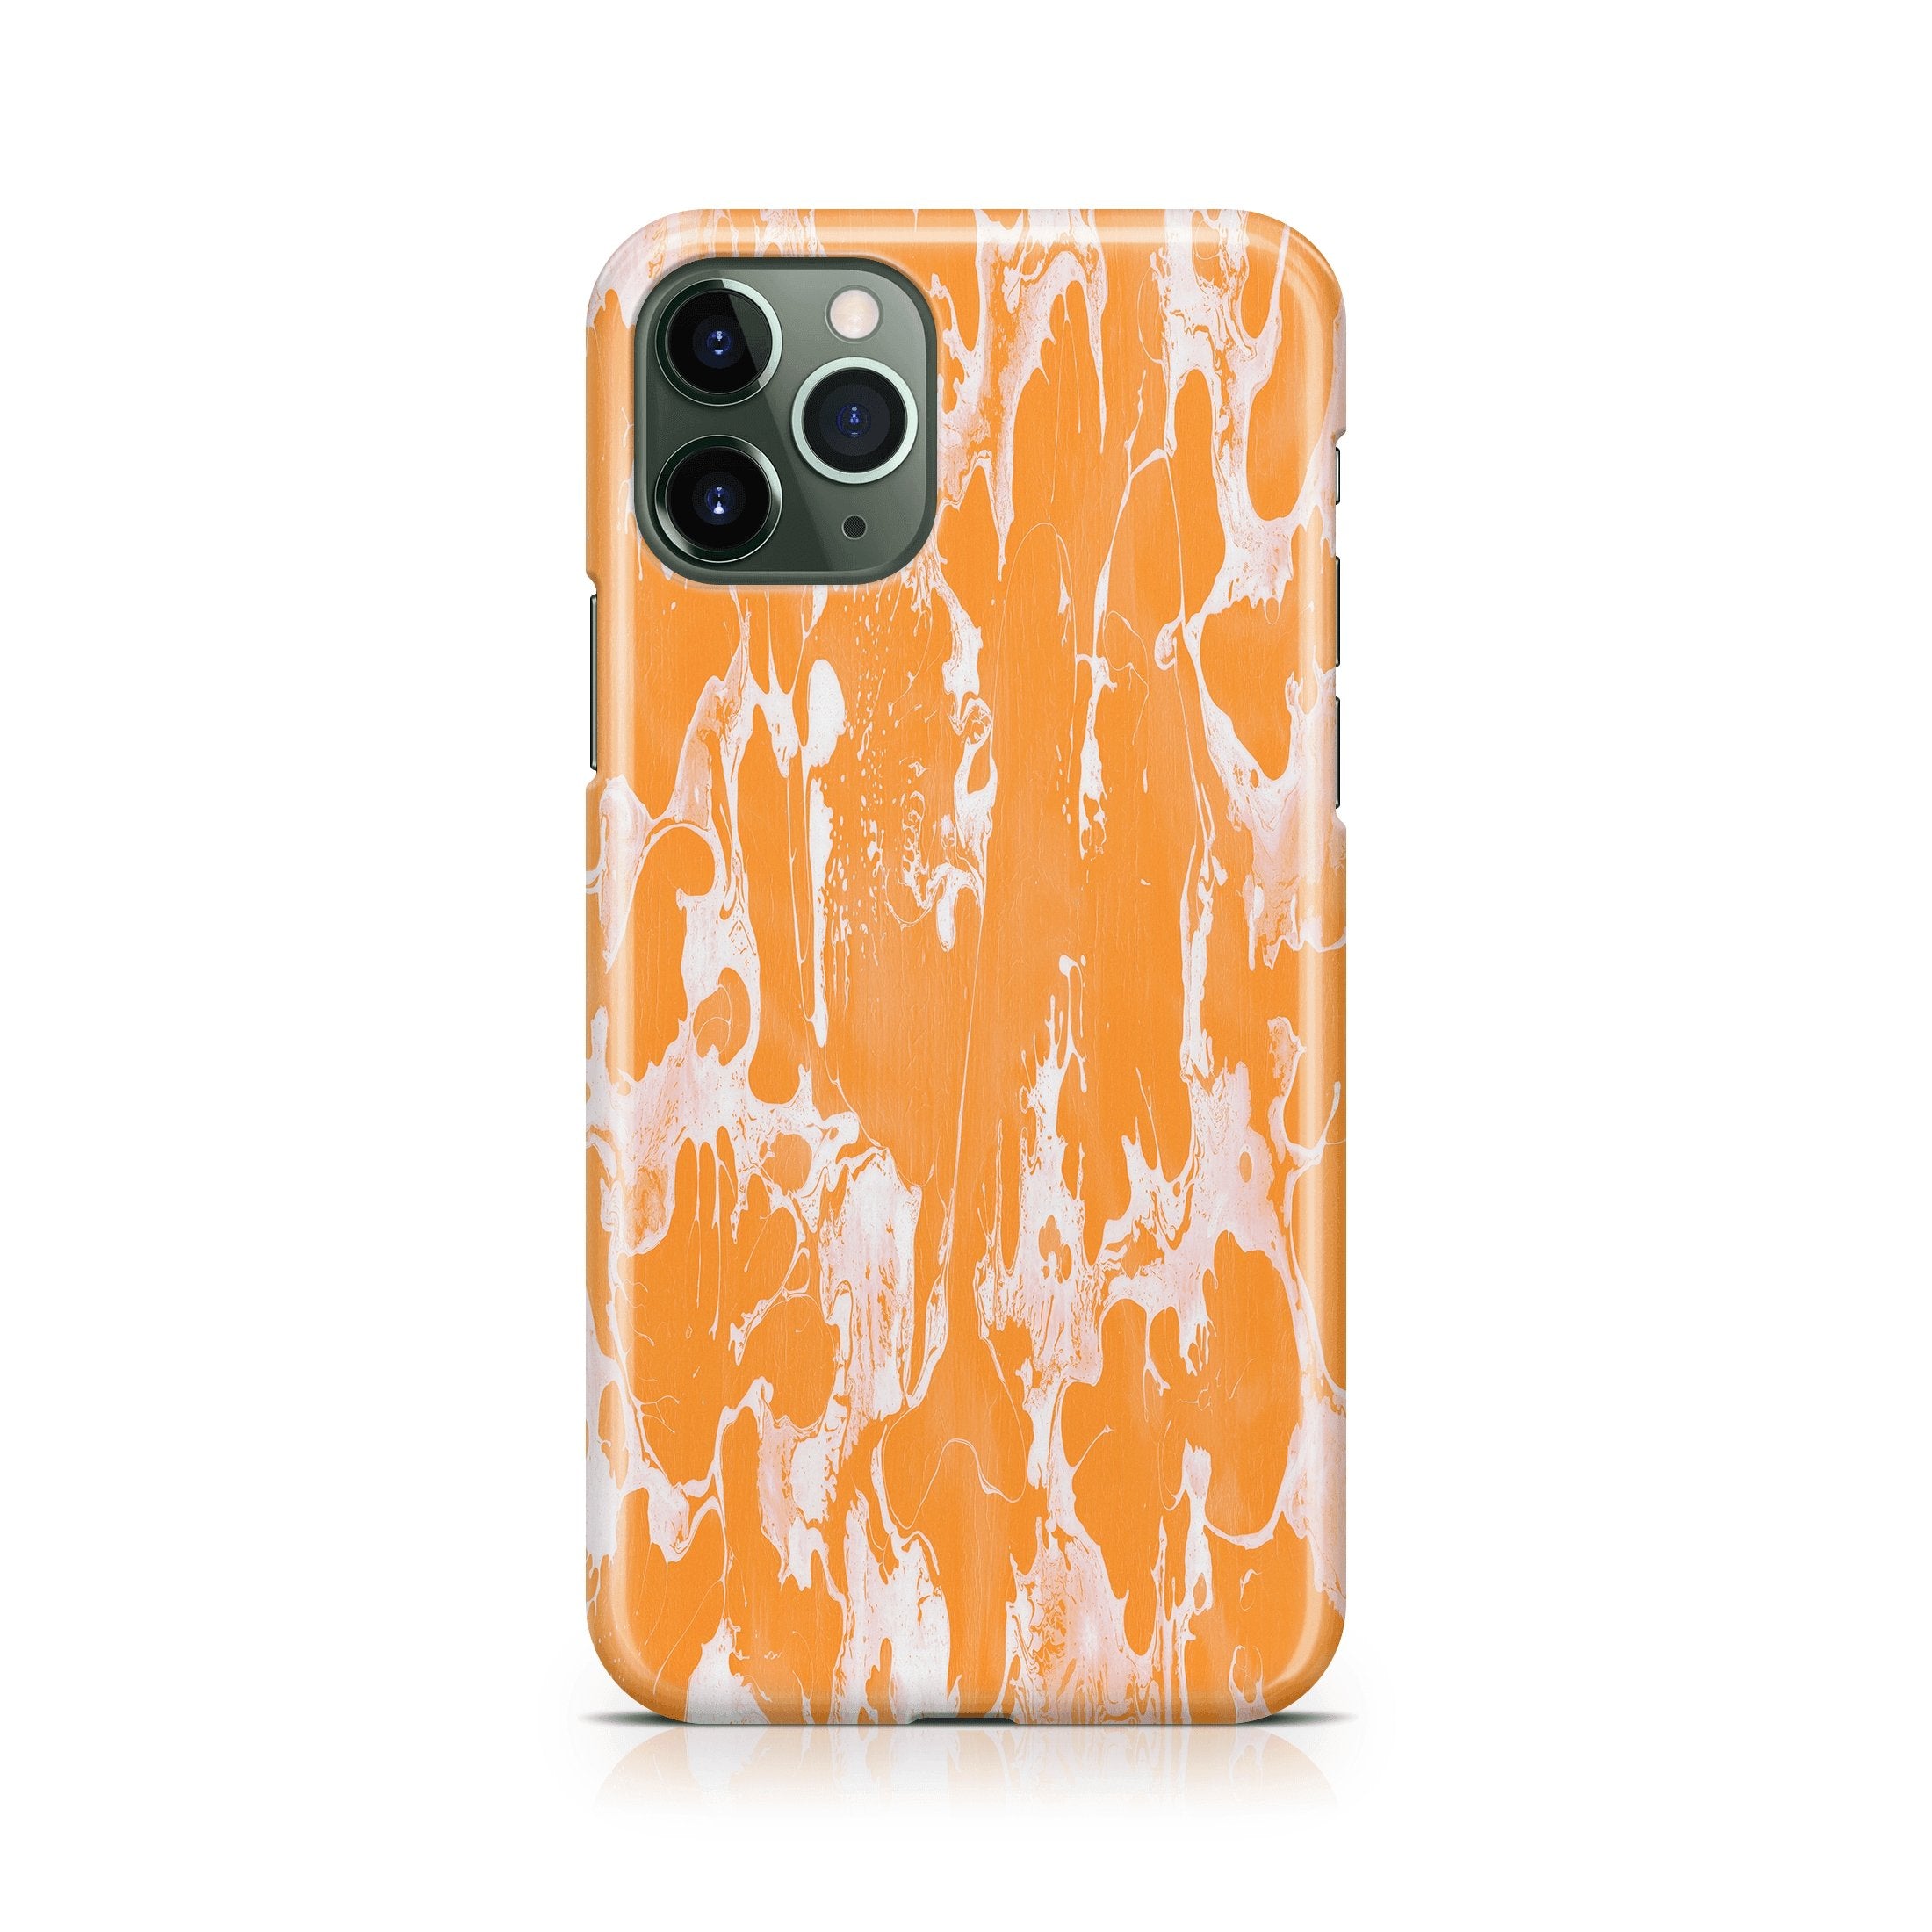 Orange Sherbet - iPhone phone case designs by CaseSwagger